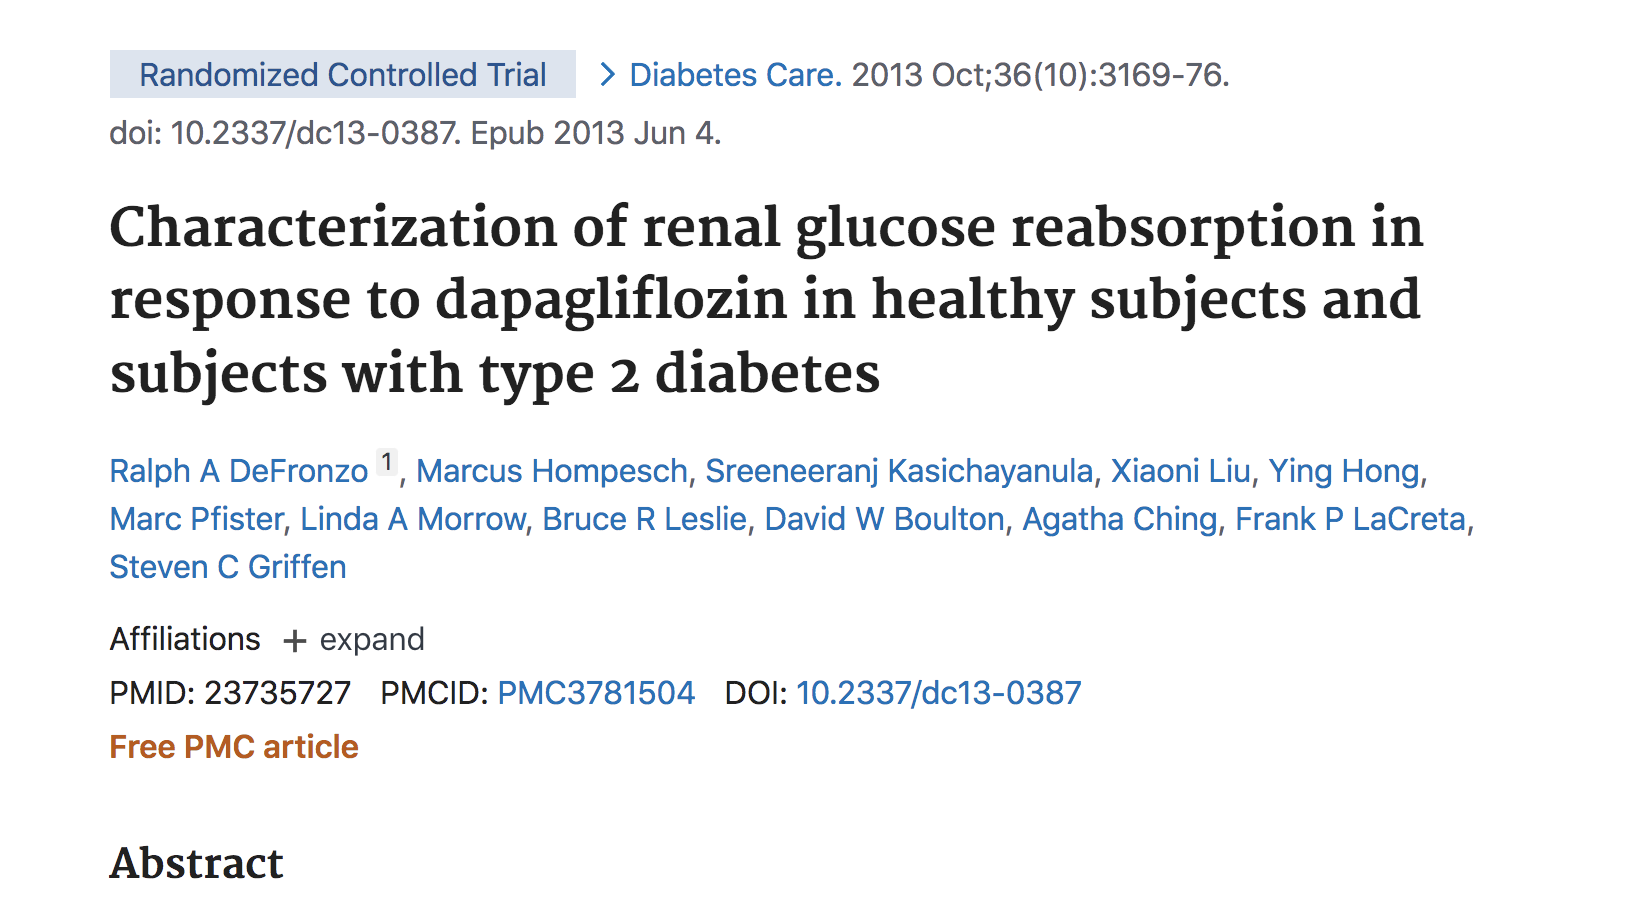 image of Characterization of renal glucose reabsorption in response to dapagliflozin in healthy subjects and subjects with type 2 diabetes